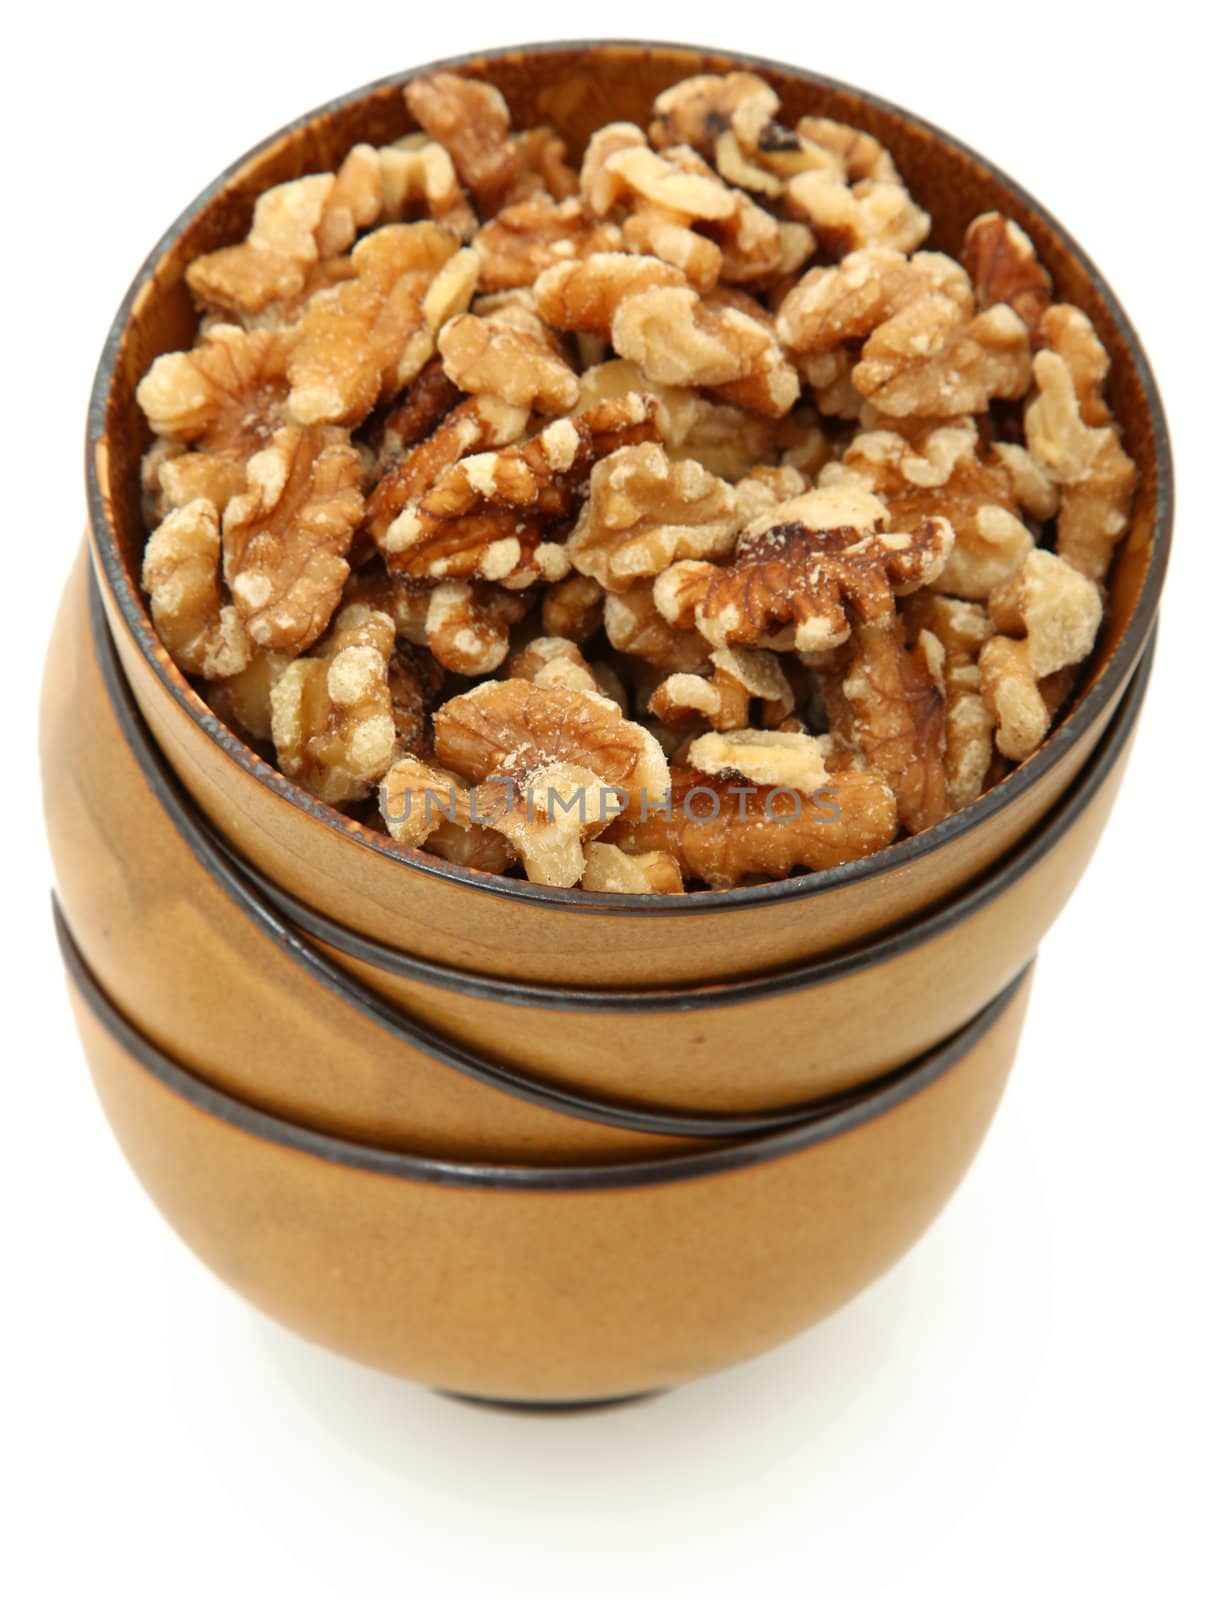 Stack of bowls filled with walnuts over white background.